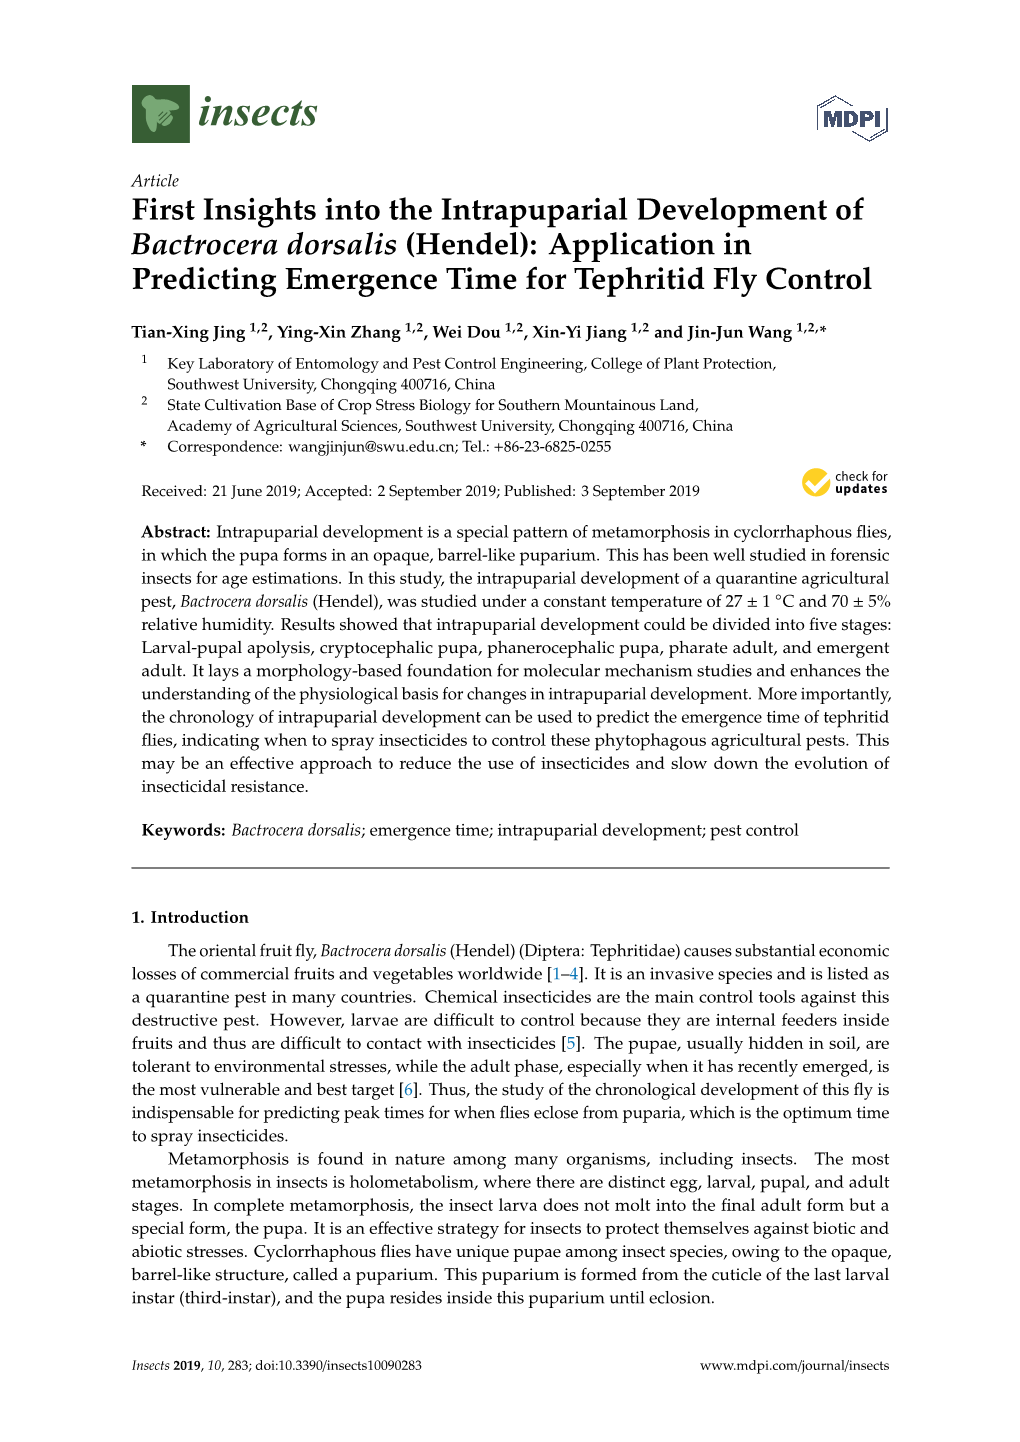 First Insights Into the Intrapuparial Development of Bactrocera Dorsalis (Hendel): Application in Predicting Emergence Time for Tephritid Fly Control